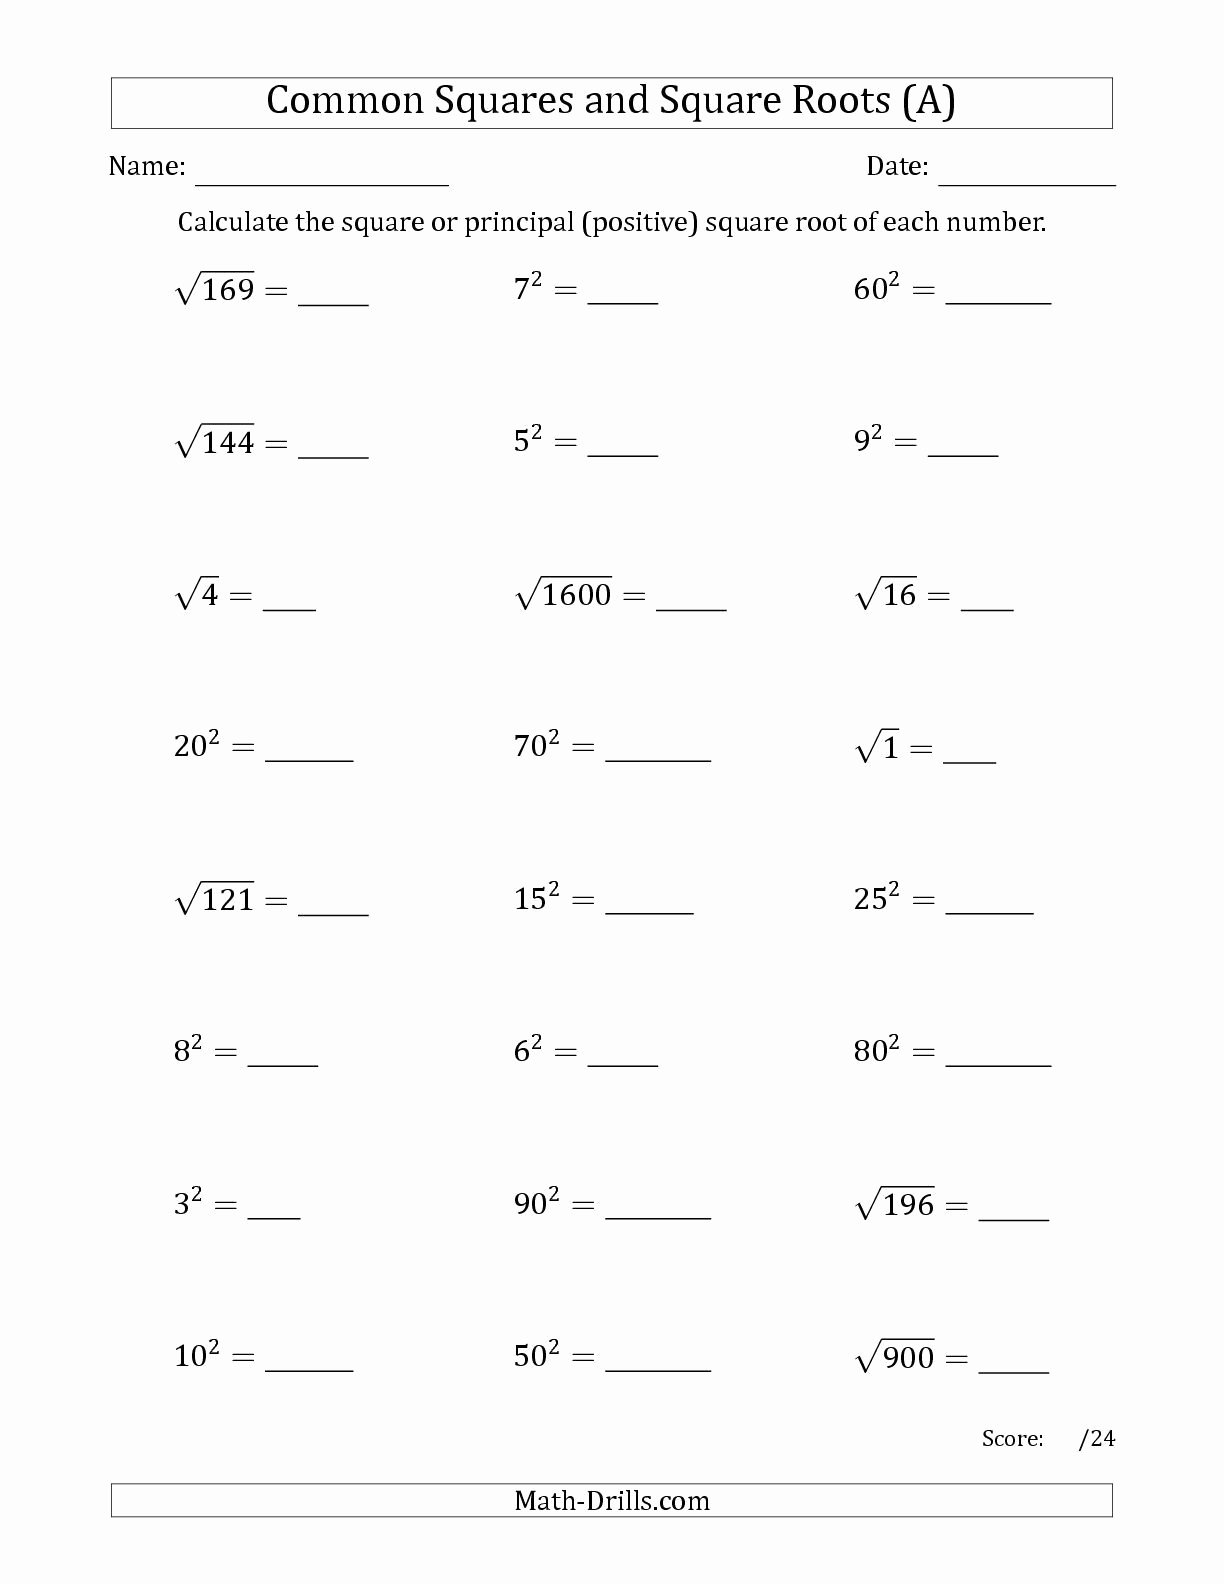 Square Root Practice Worksheet Lovely the Monly Used Squares and Square Roots Mixed Questions